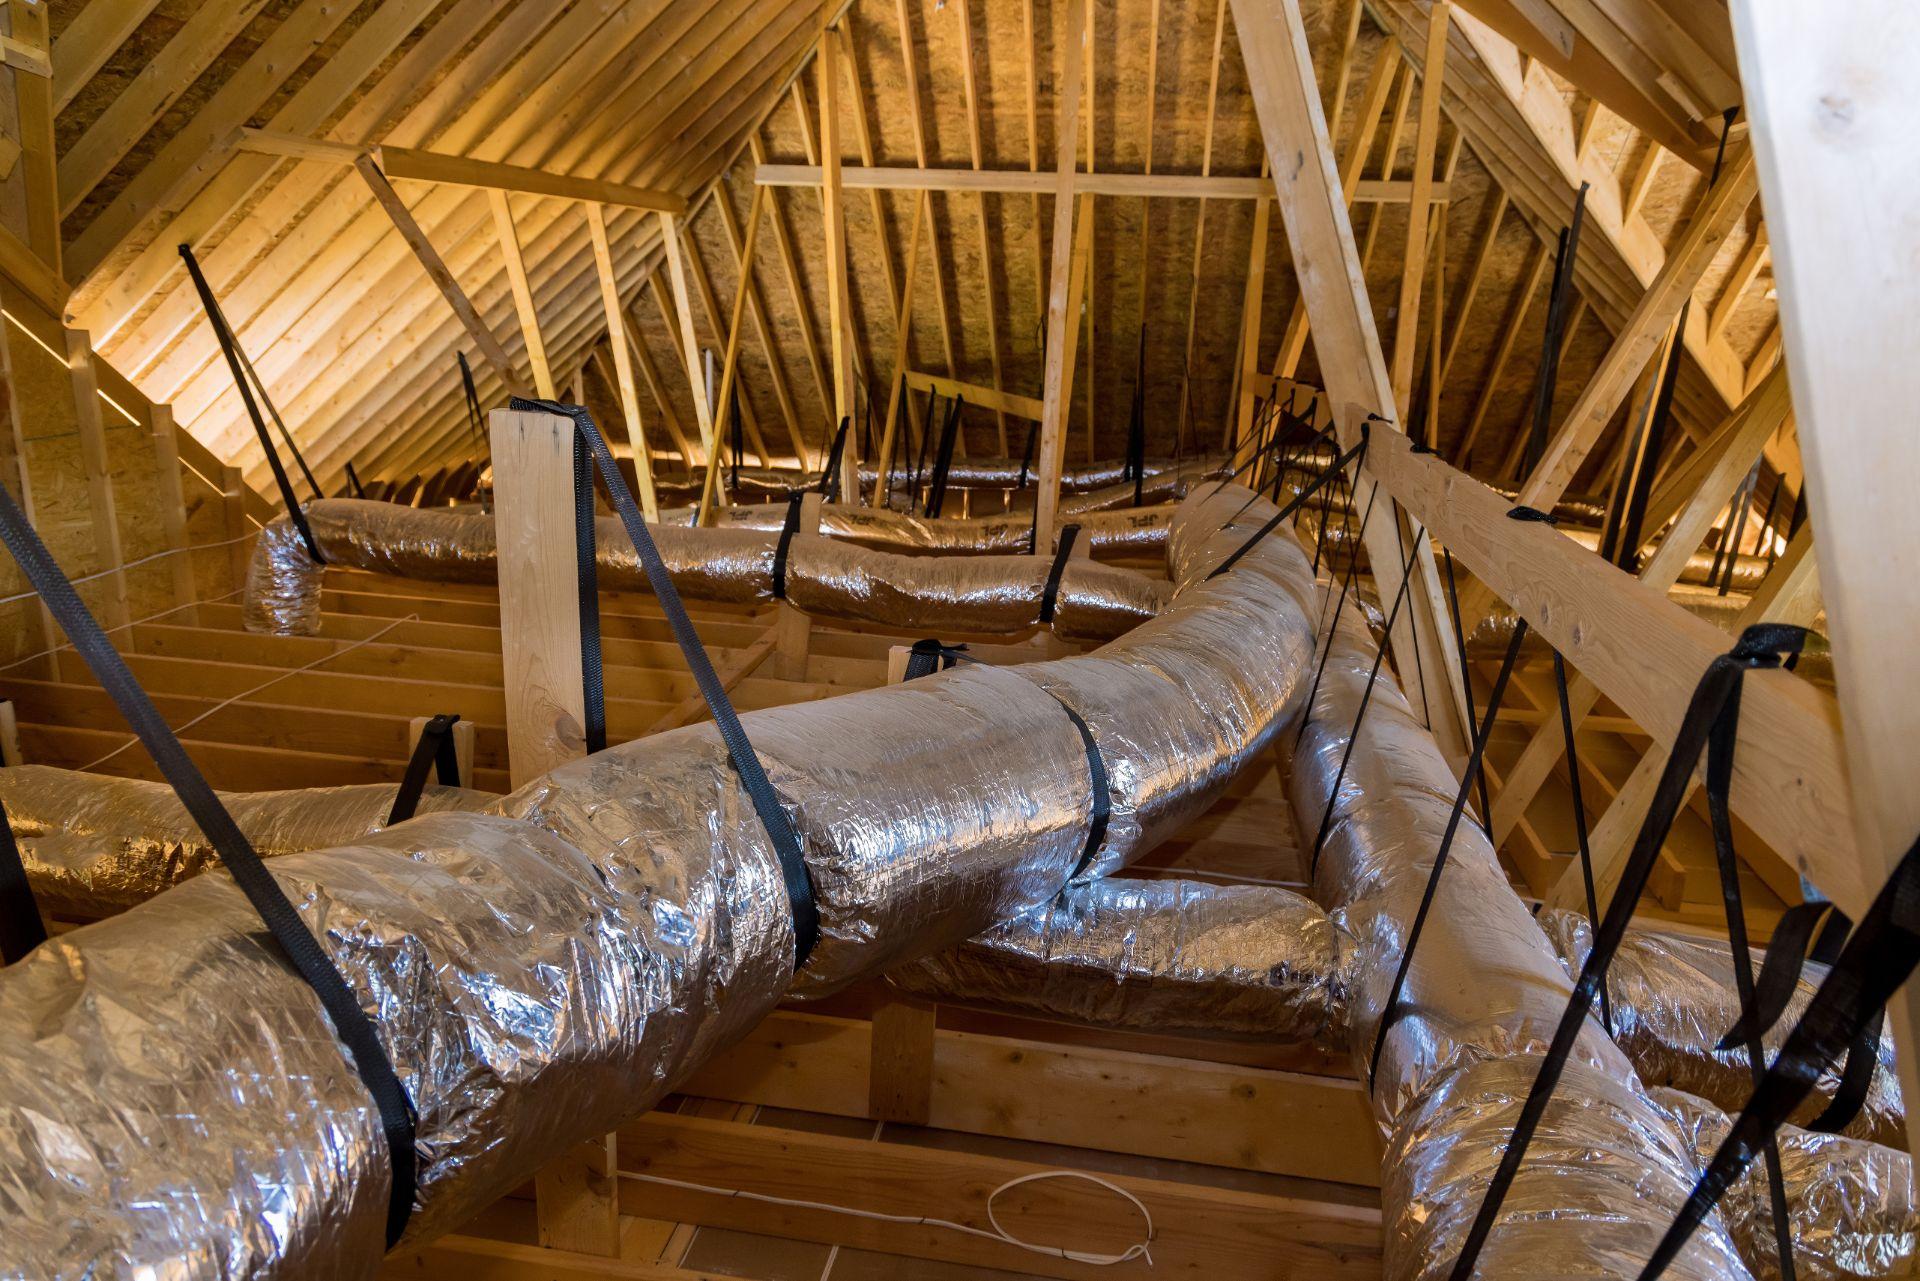 Home under construction ventilation pipes are silver insulation material on ceiling of attic